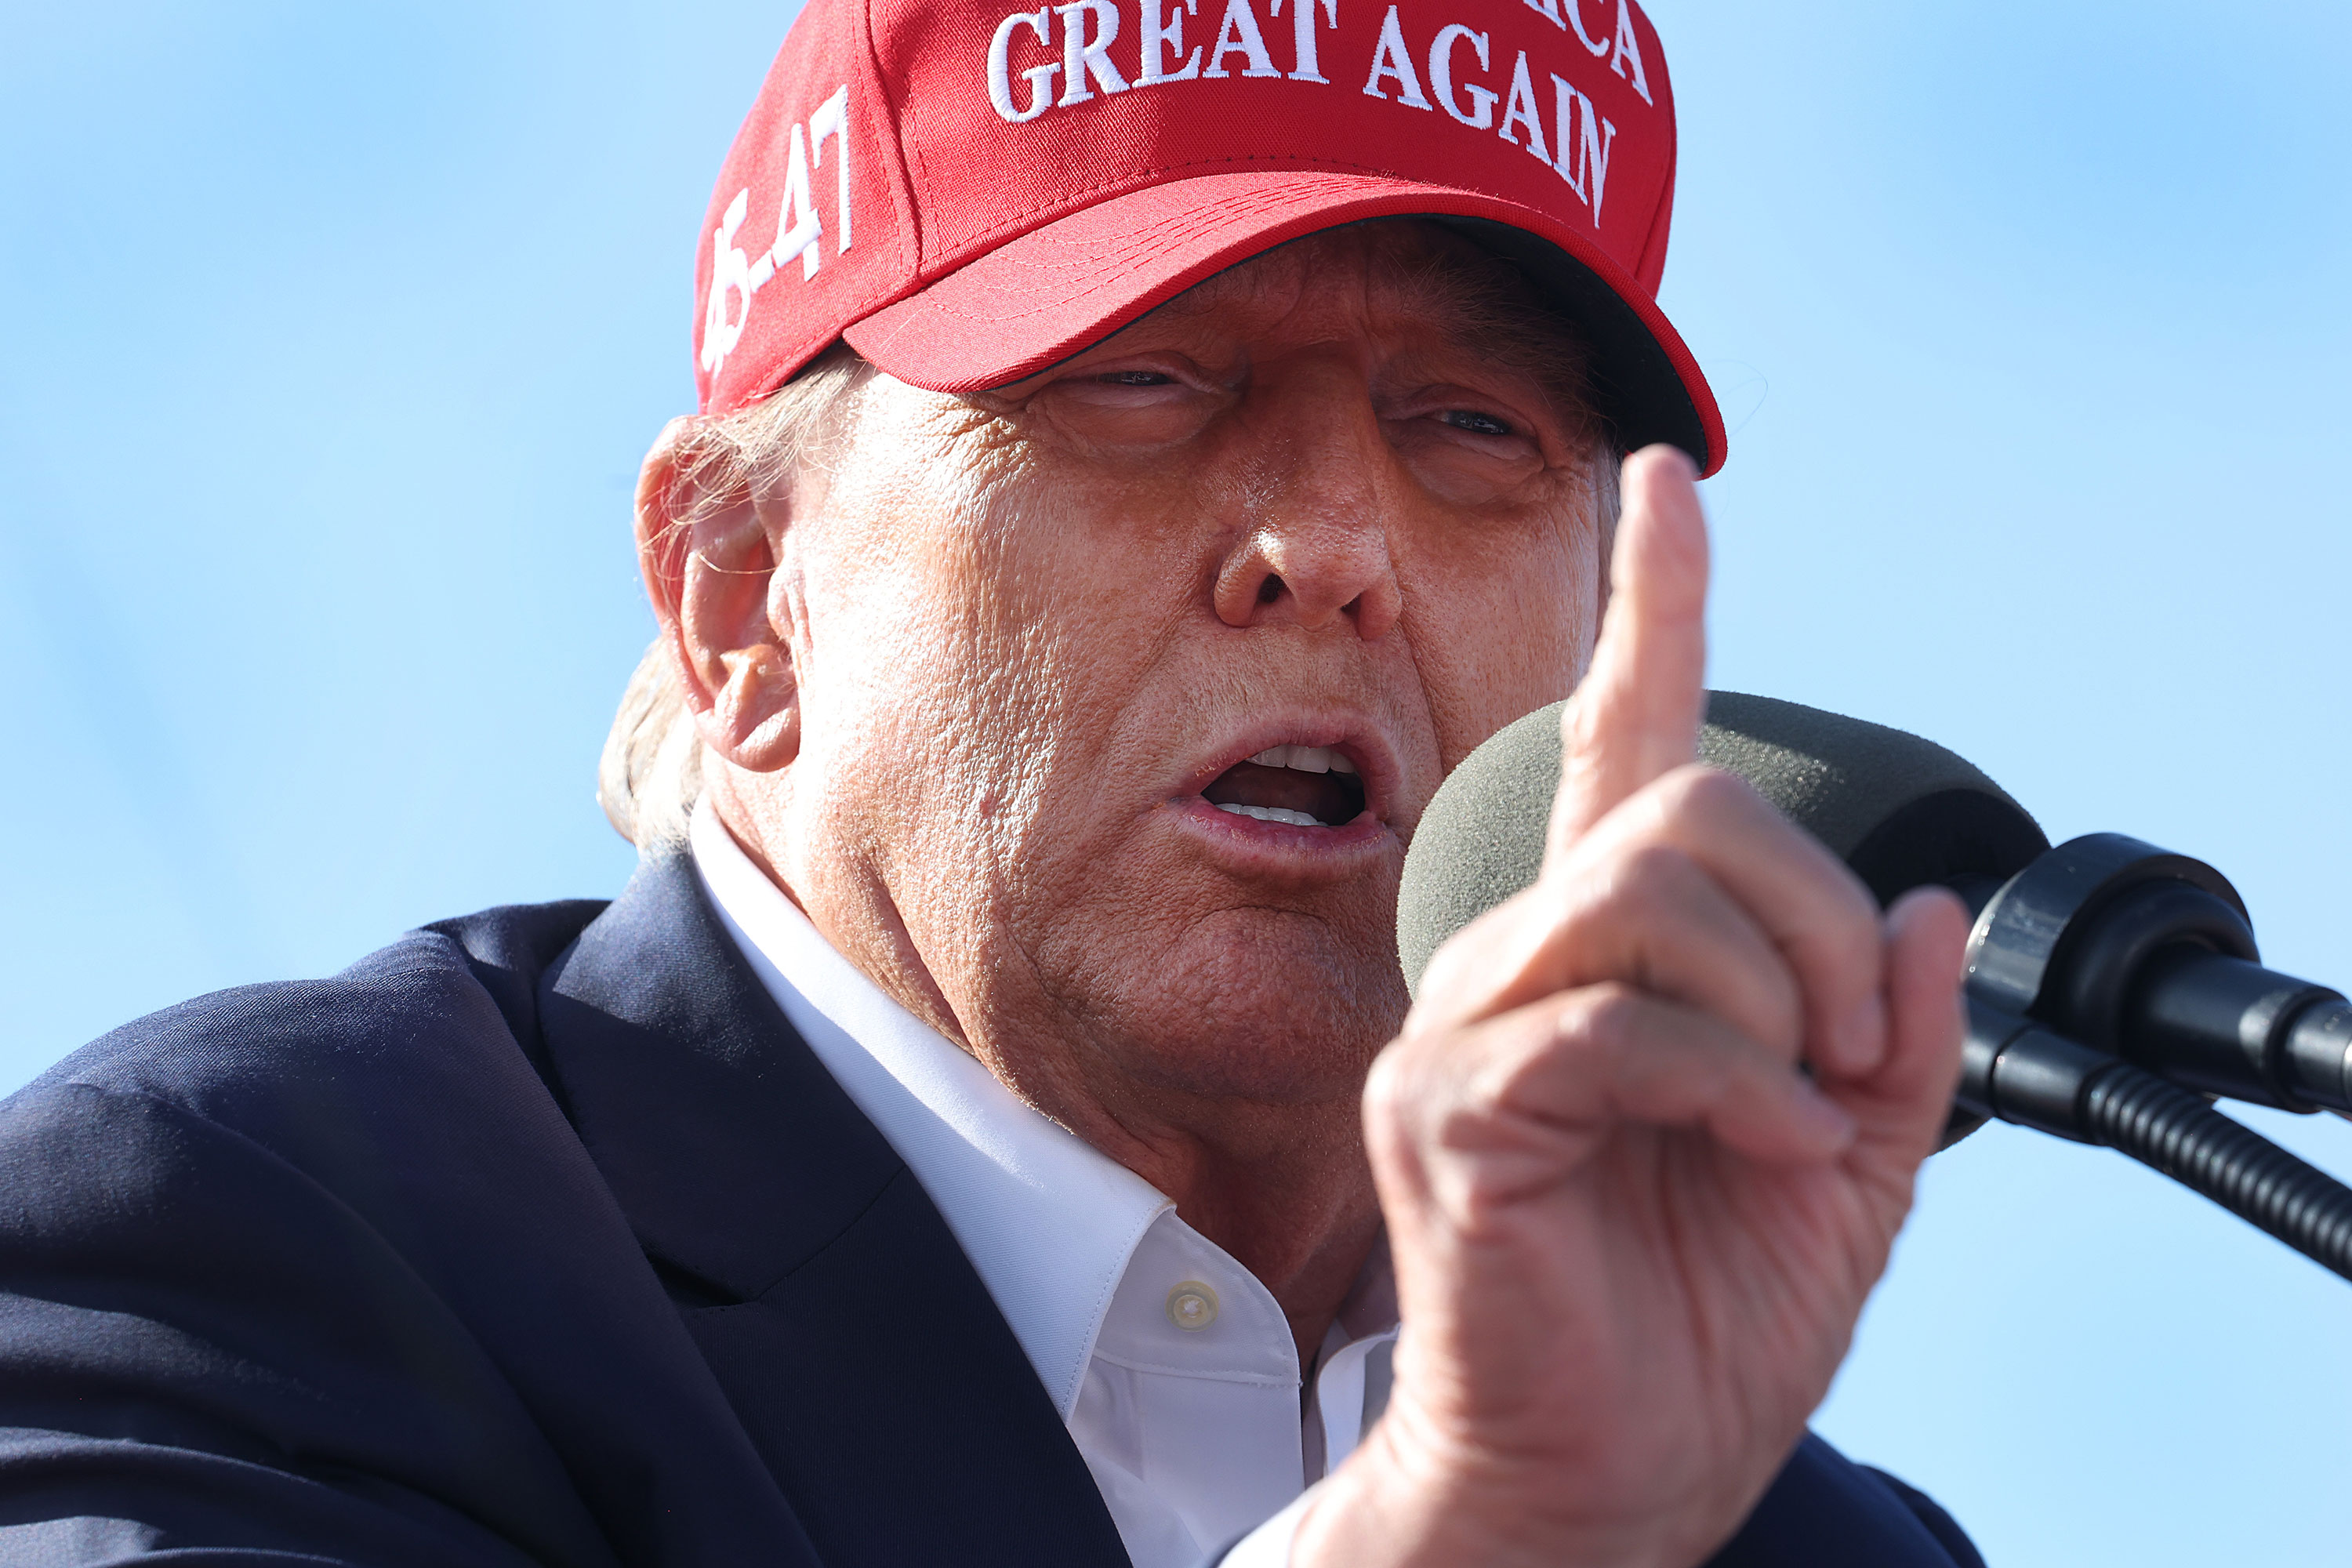 Former President Donald Trump speaks to supporters during a rally in Vandalia, Ohio, on March 16.